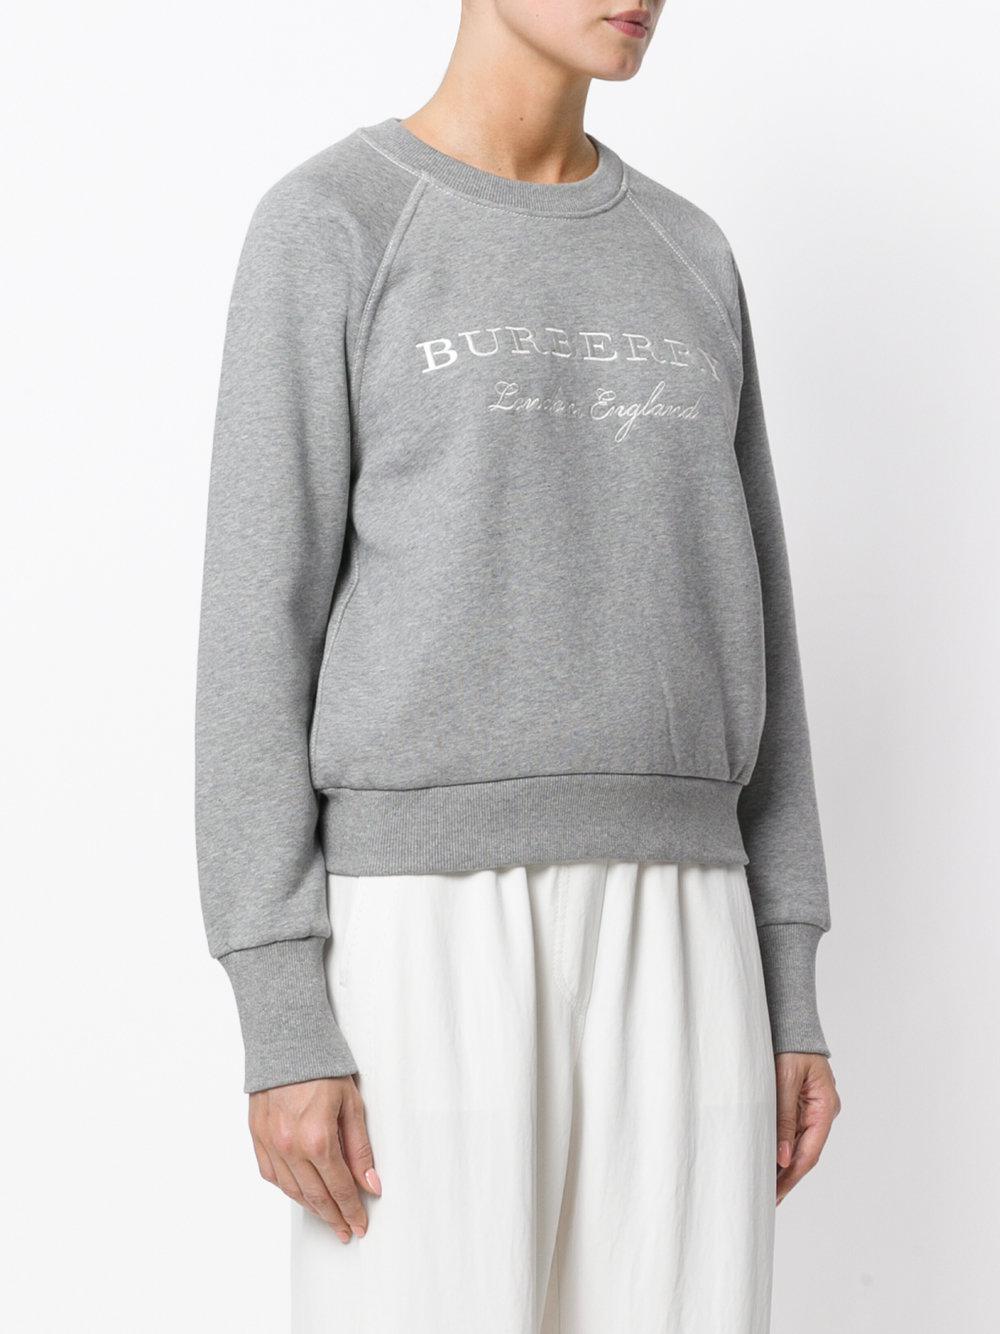 Burberry Cotton Logo Embroidered Sweatshirt in Grey (Gray) - Lyst